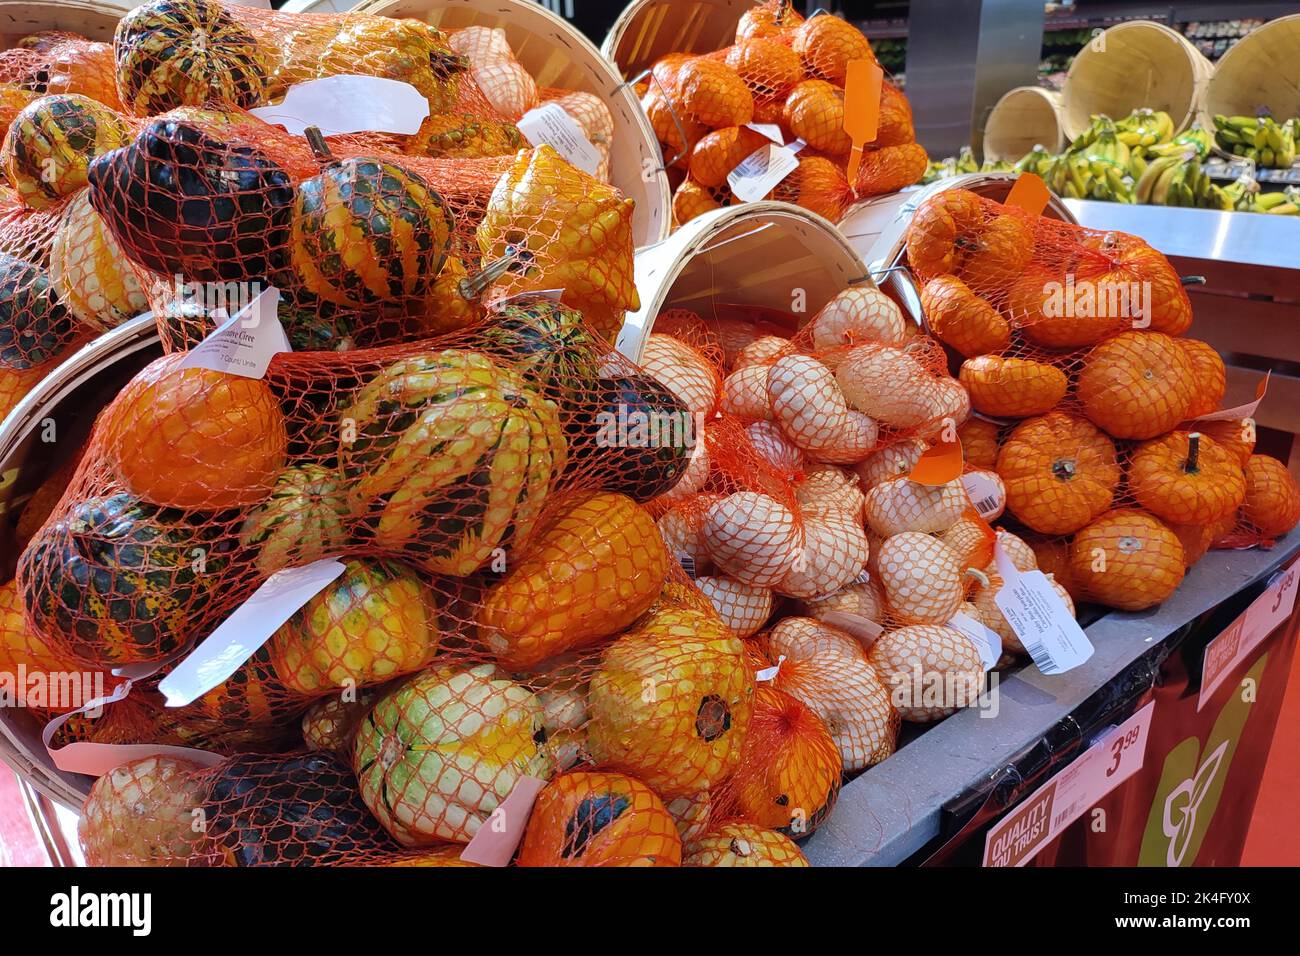 Toronto, Canada - 09-22-2022: Pumpkins in the basket for sale in the supermarket Stock Photo